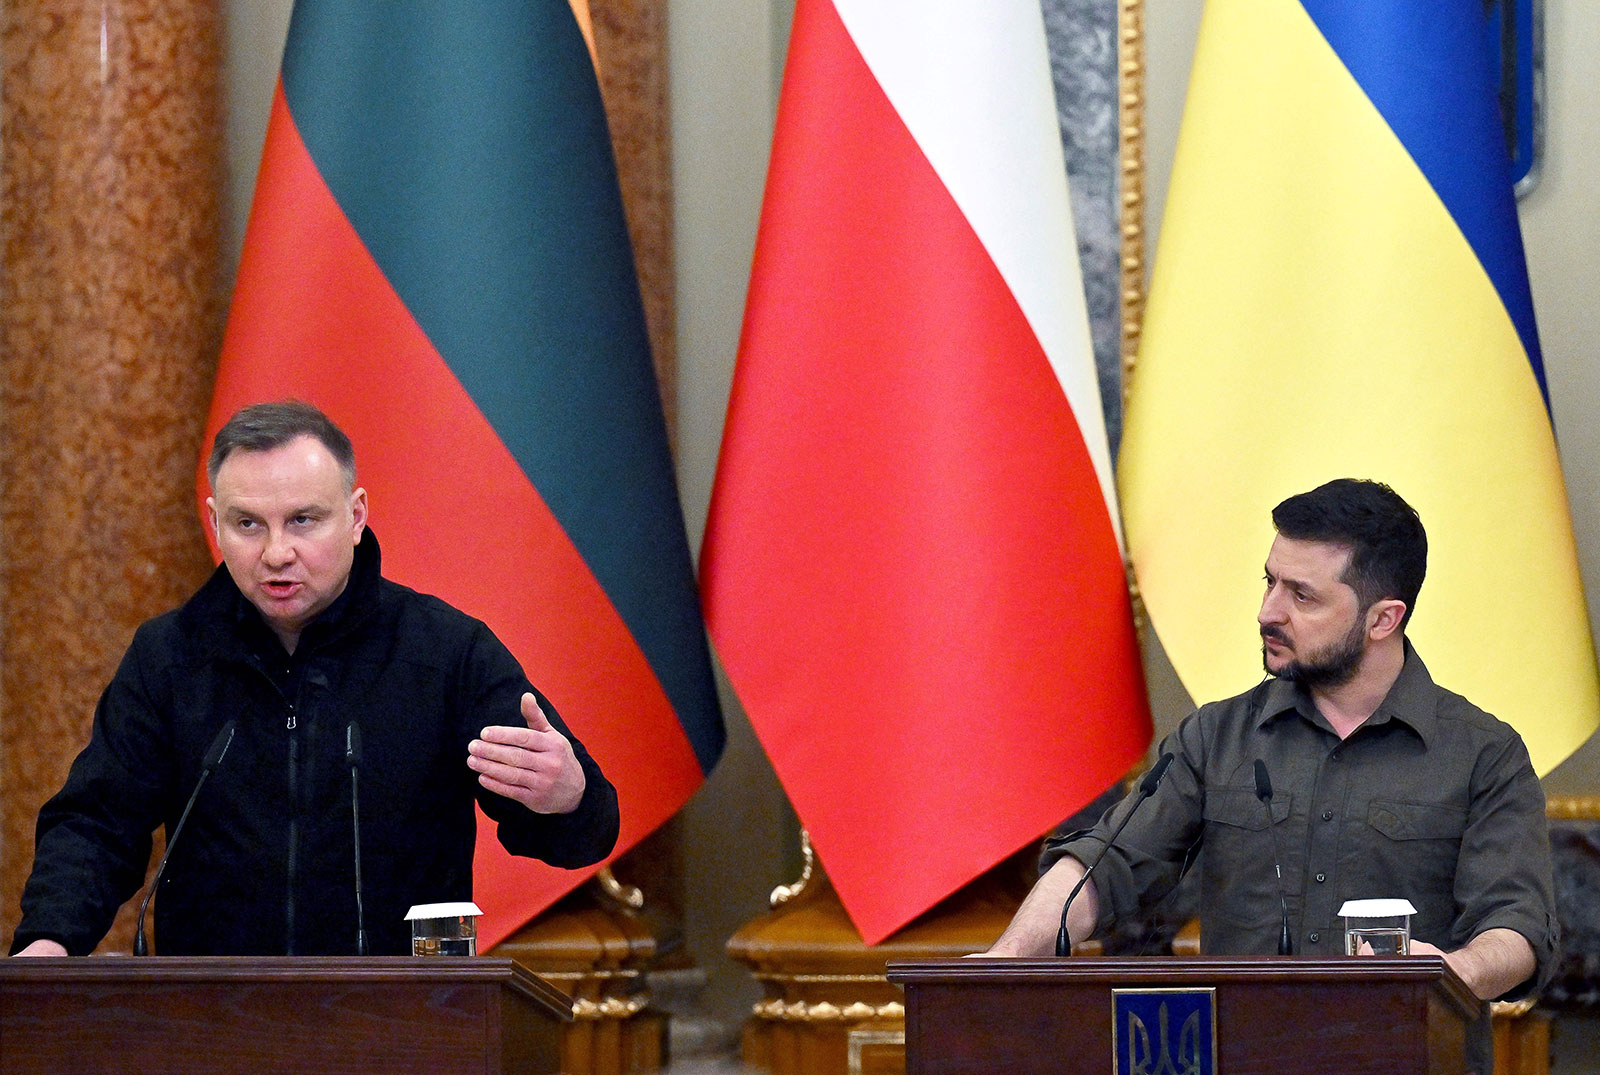 Polish President Andrzej Duda speaks during a press conference with Ukrainian President Volodymyr Zelensky along with the presidents of Lithuania, Latvia and Estonia following their talks in Kyiv on Wednesday, April 13. 